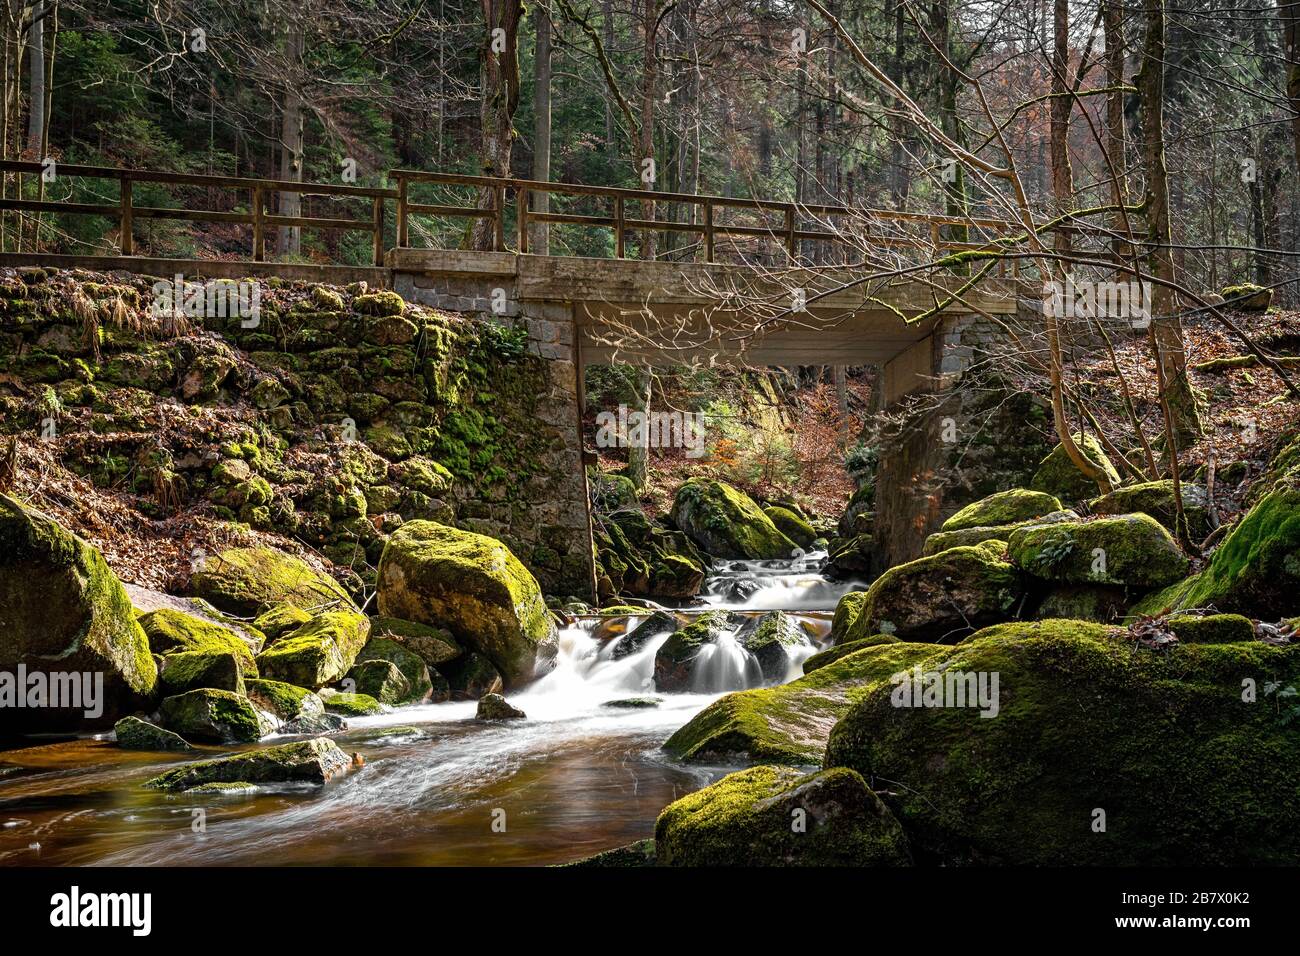 15.03.2020, the waterfall of the Ilse in Ilsenburg in a forest stucco in the northern Harz. Photo with long exposure of flowing water with ND filter. The Ilse is a 42.9 km long, southeastern and orographically right-hand tributary of the Oker in Saxony-Anhalt and Lower Saxony. It flows in the Harz and northern Harz foothills. | usage worldwide Stock Photo